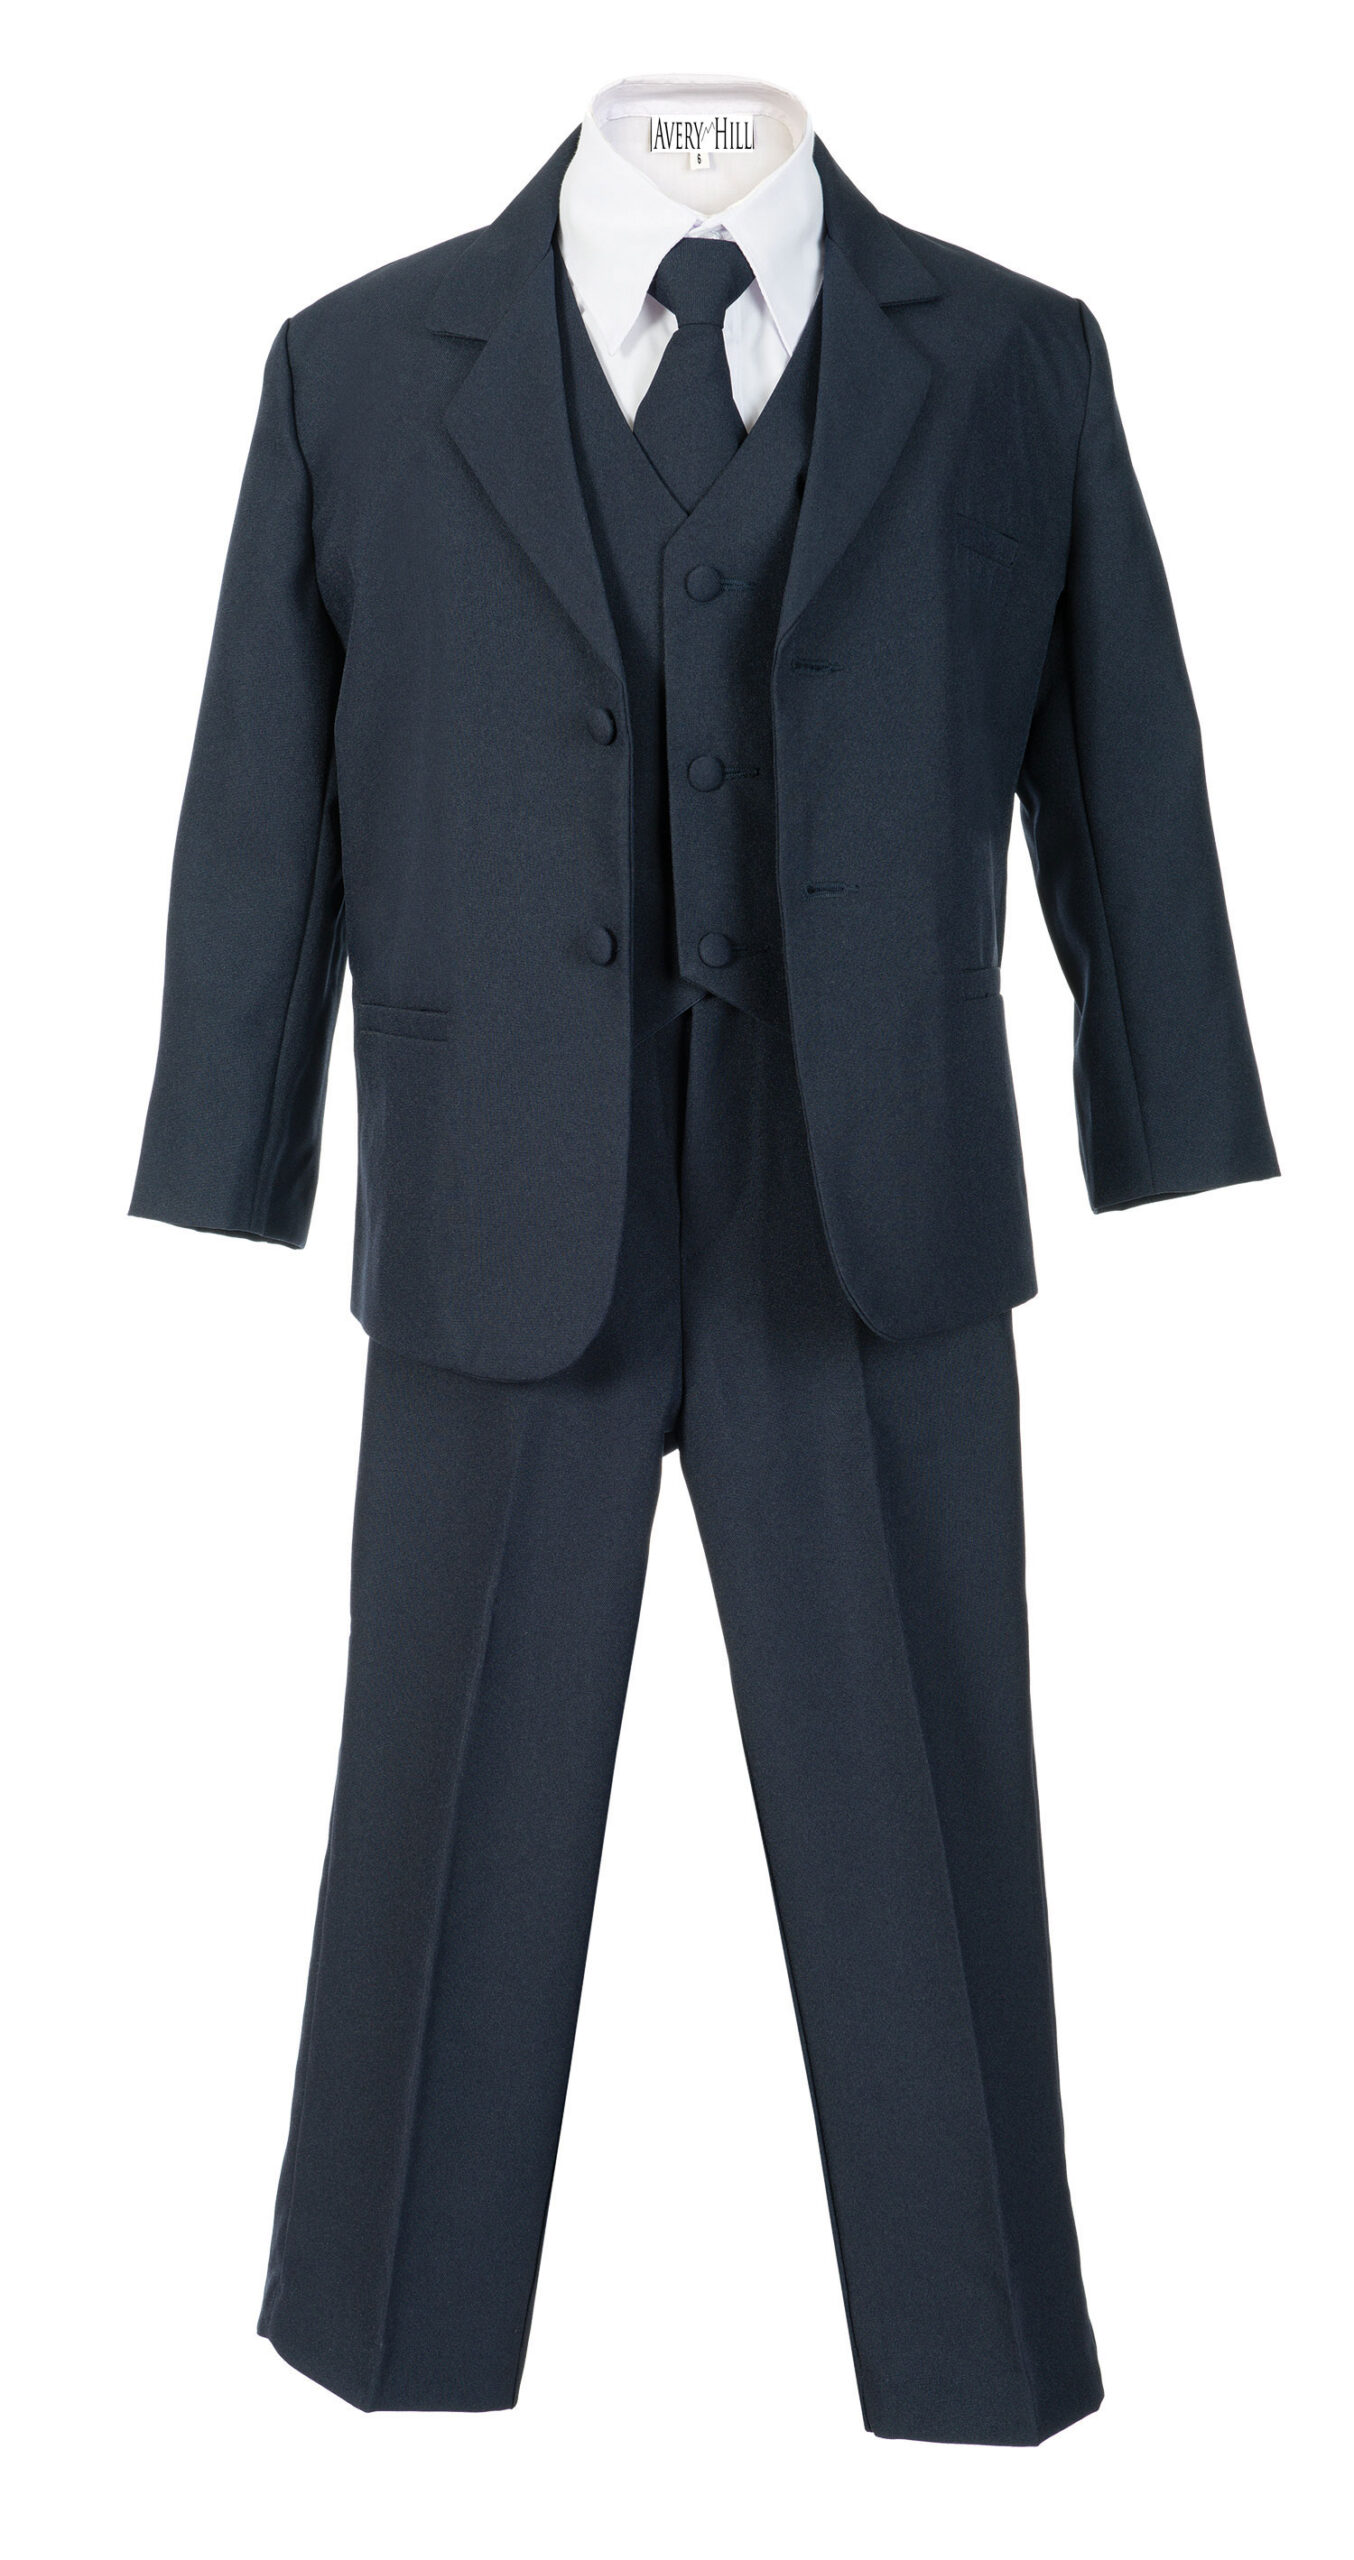 Avery Hill Boys Formal 5 Piece Suit with Shirt and Vest Navy - L